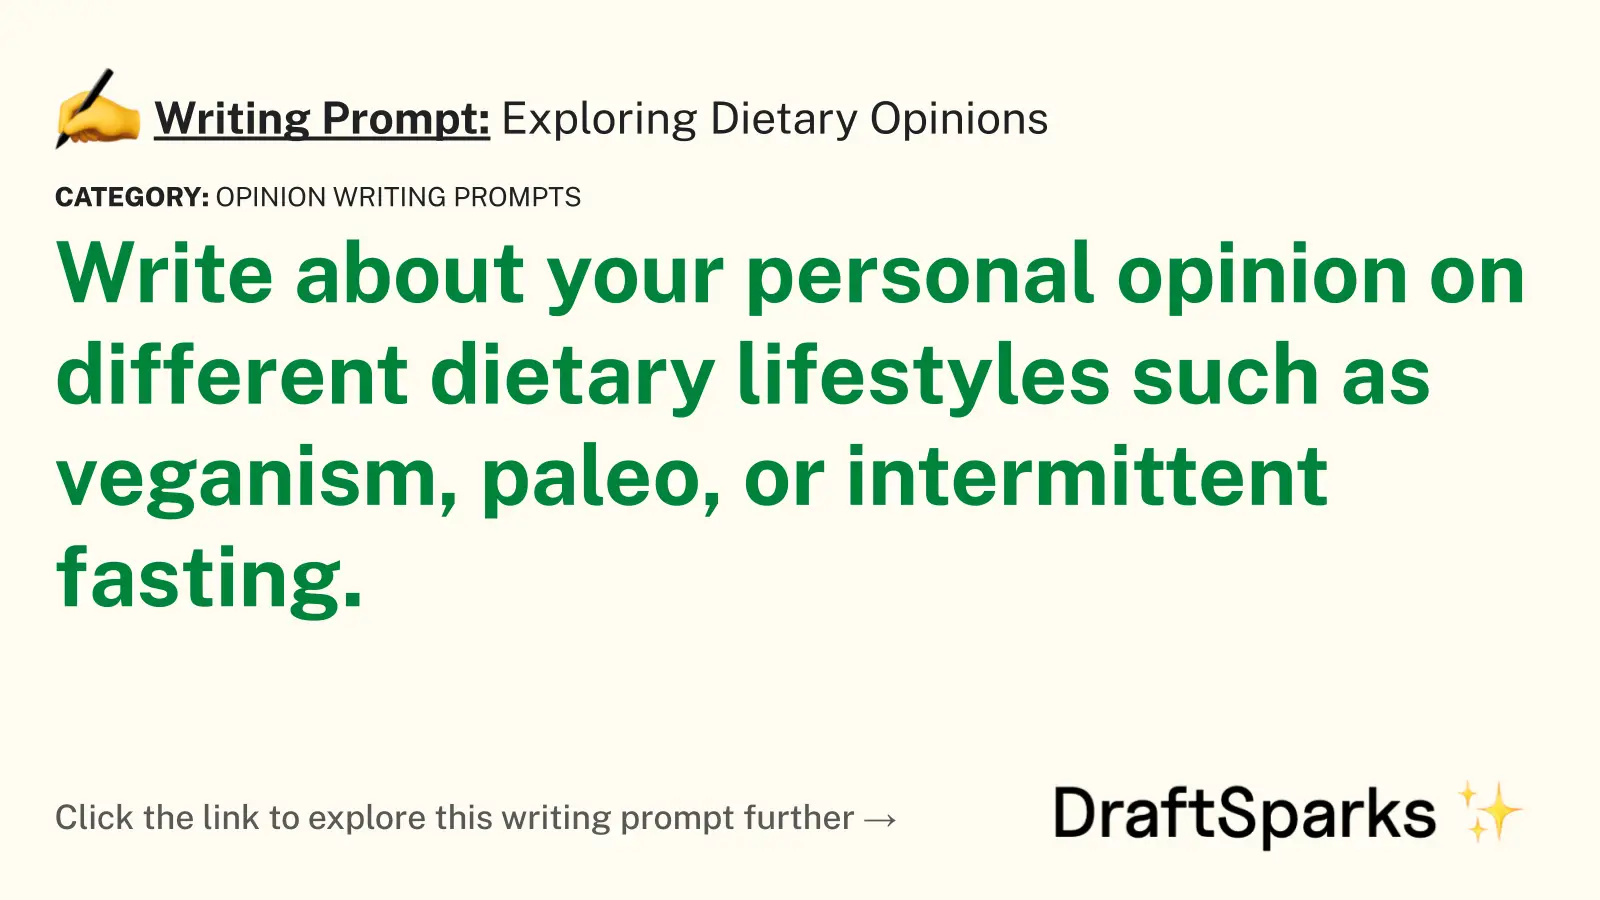 Exploring Dietary Opinions